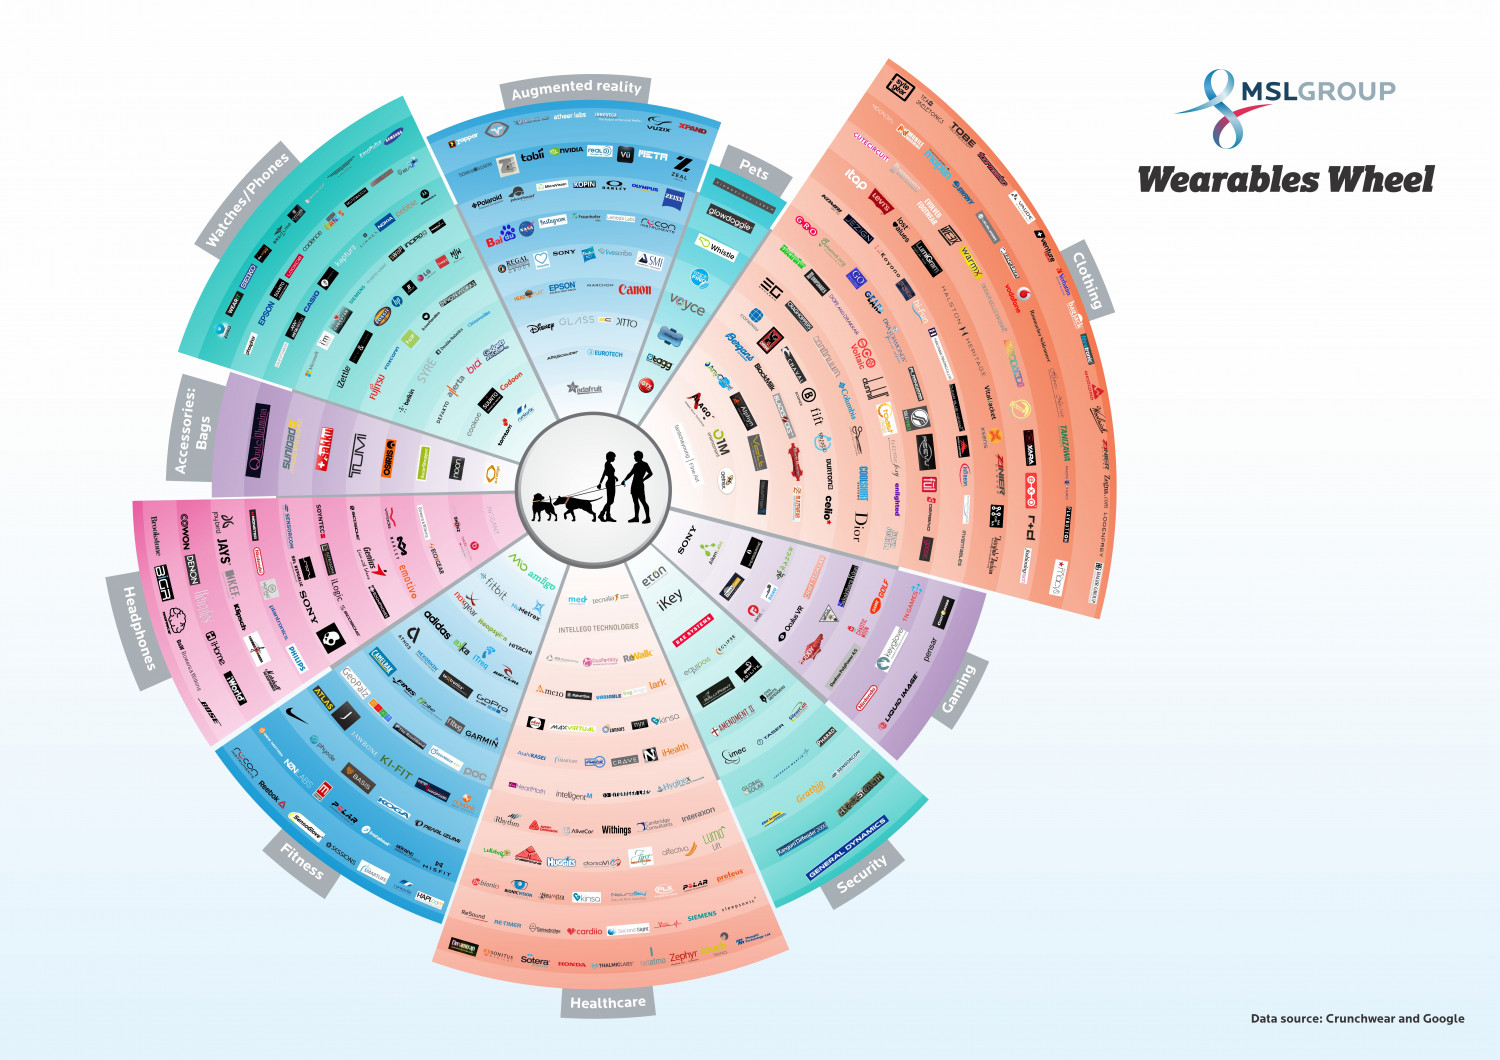 The Wearable Wheel Infographic